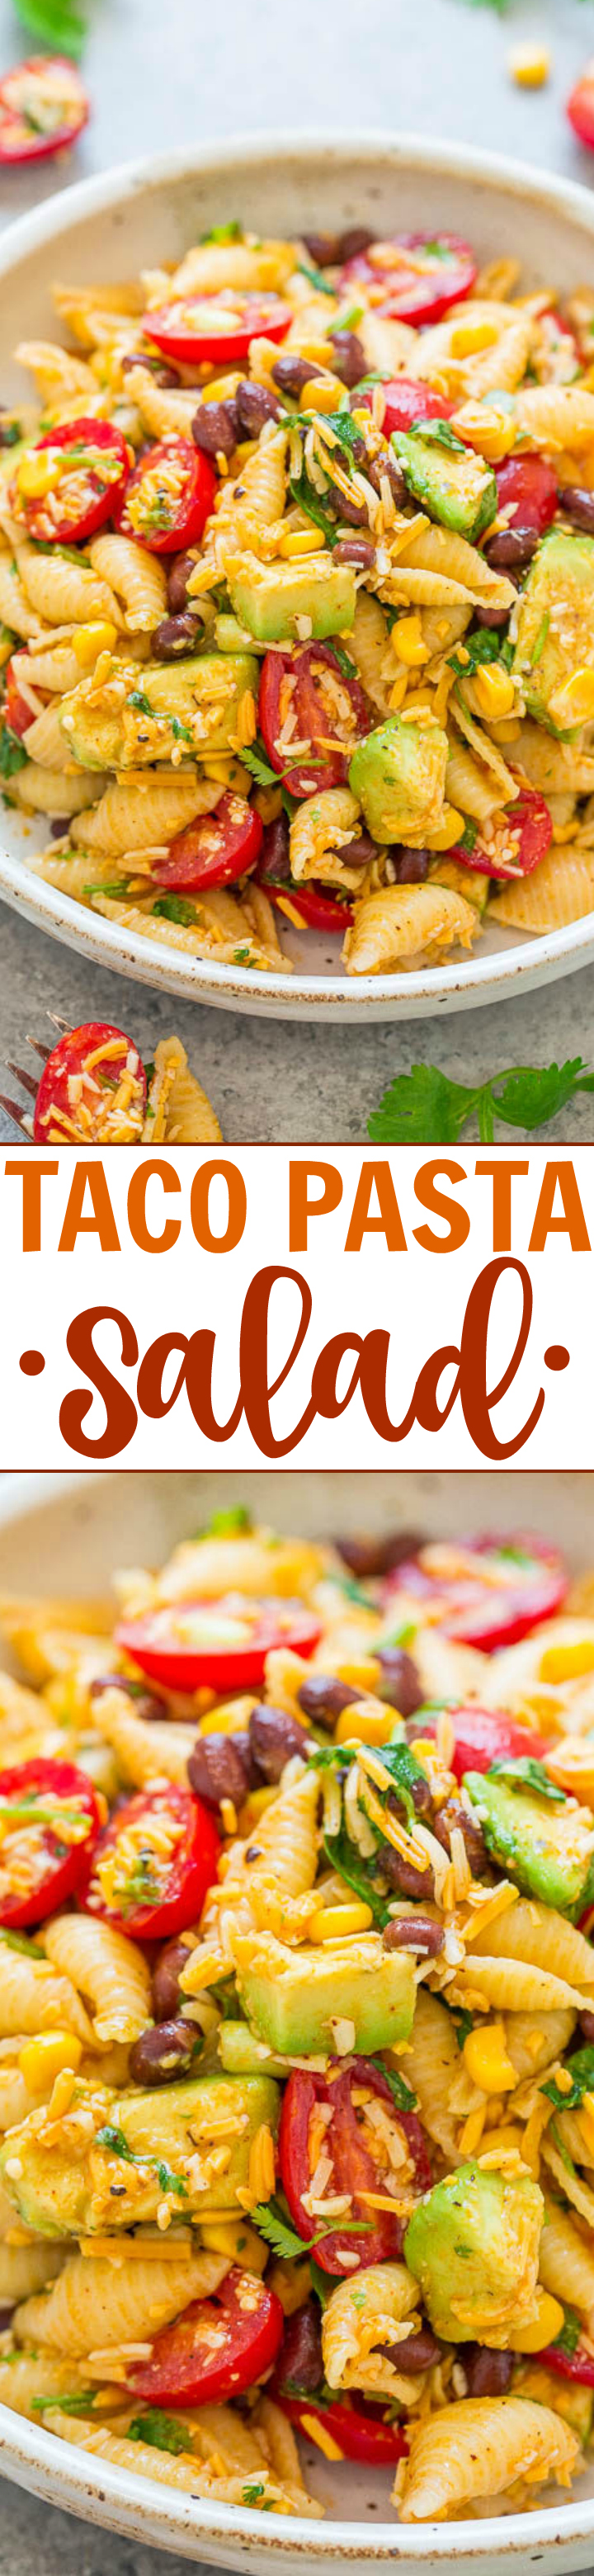 Taco Pasta Salad - EASY, ready in 20 minutes, and loaded with great Mexican-inspired ingredients including corn, black beans, tomatoes, cilantro, avocado, and more!! Perfect for picnics, parties, and potlucks!! 